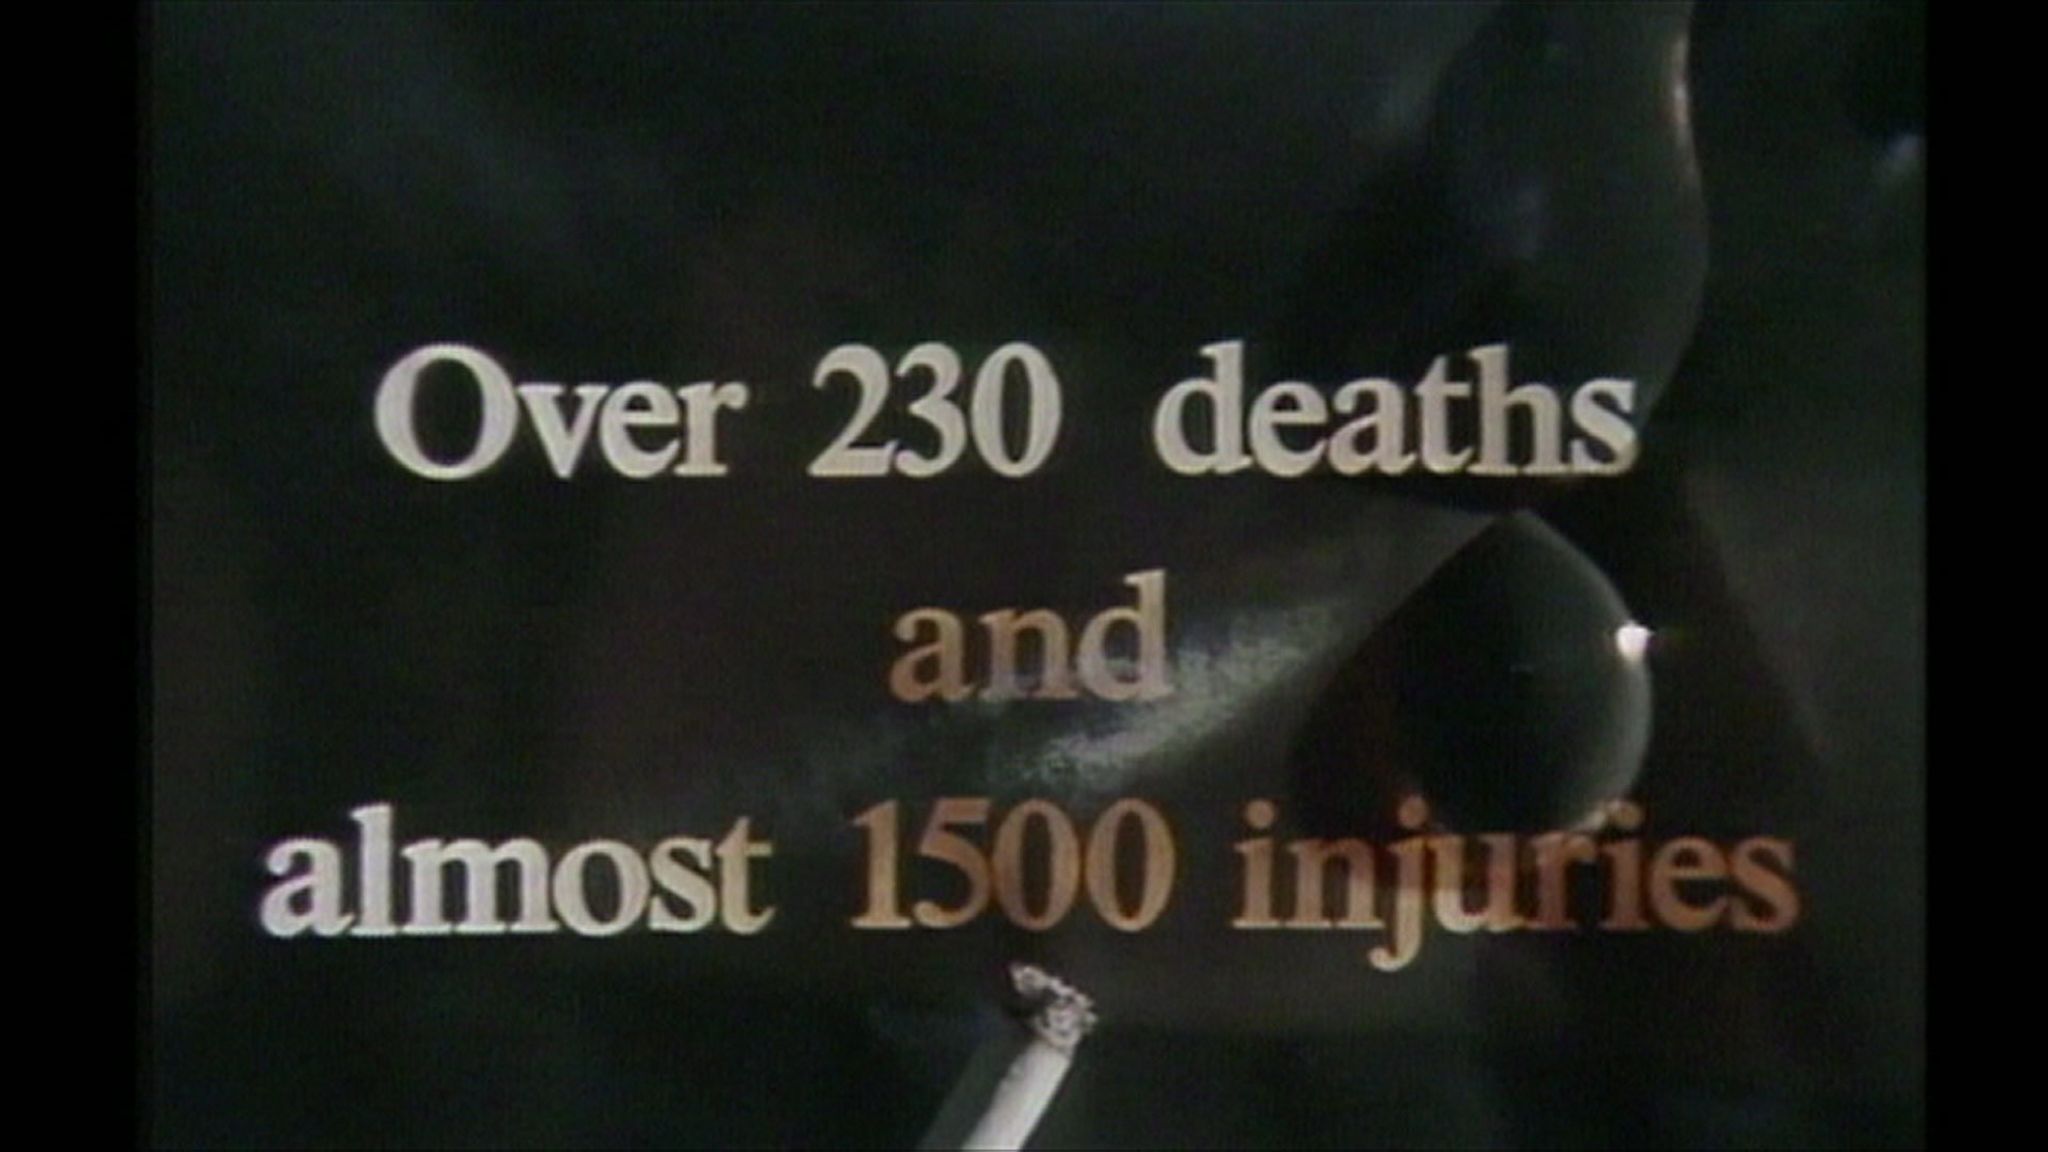 A still from a public information film on the human cost of fires caused by smoking